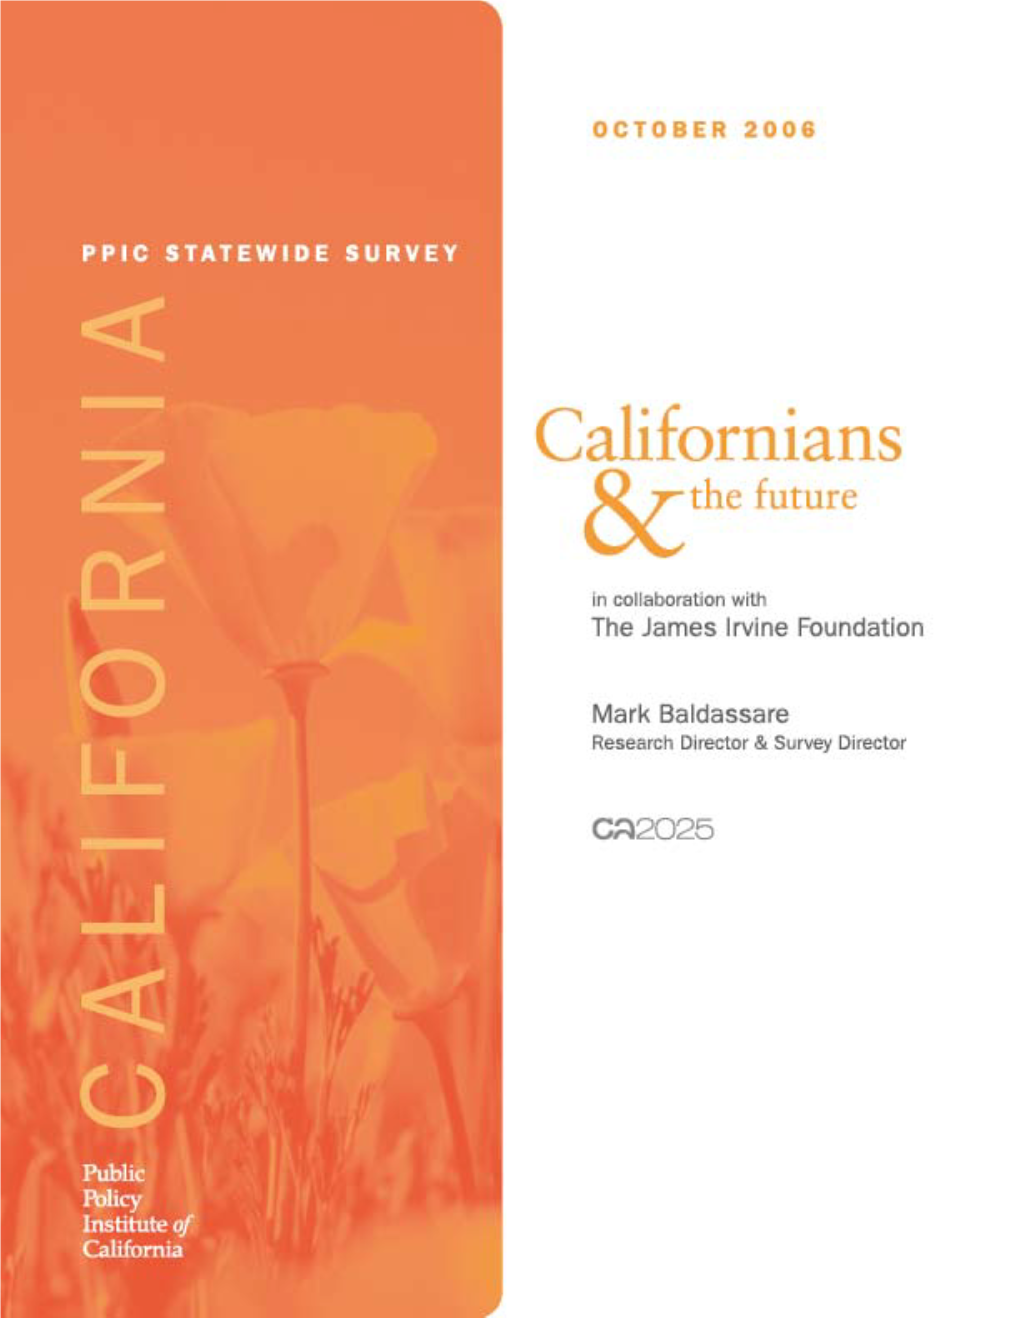 PPIC Statewide Survey: Californians